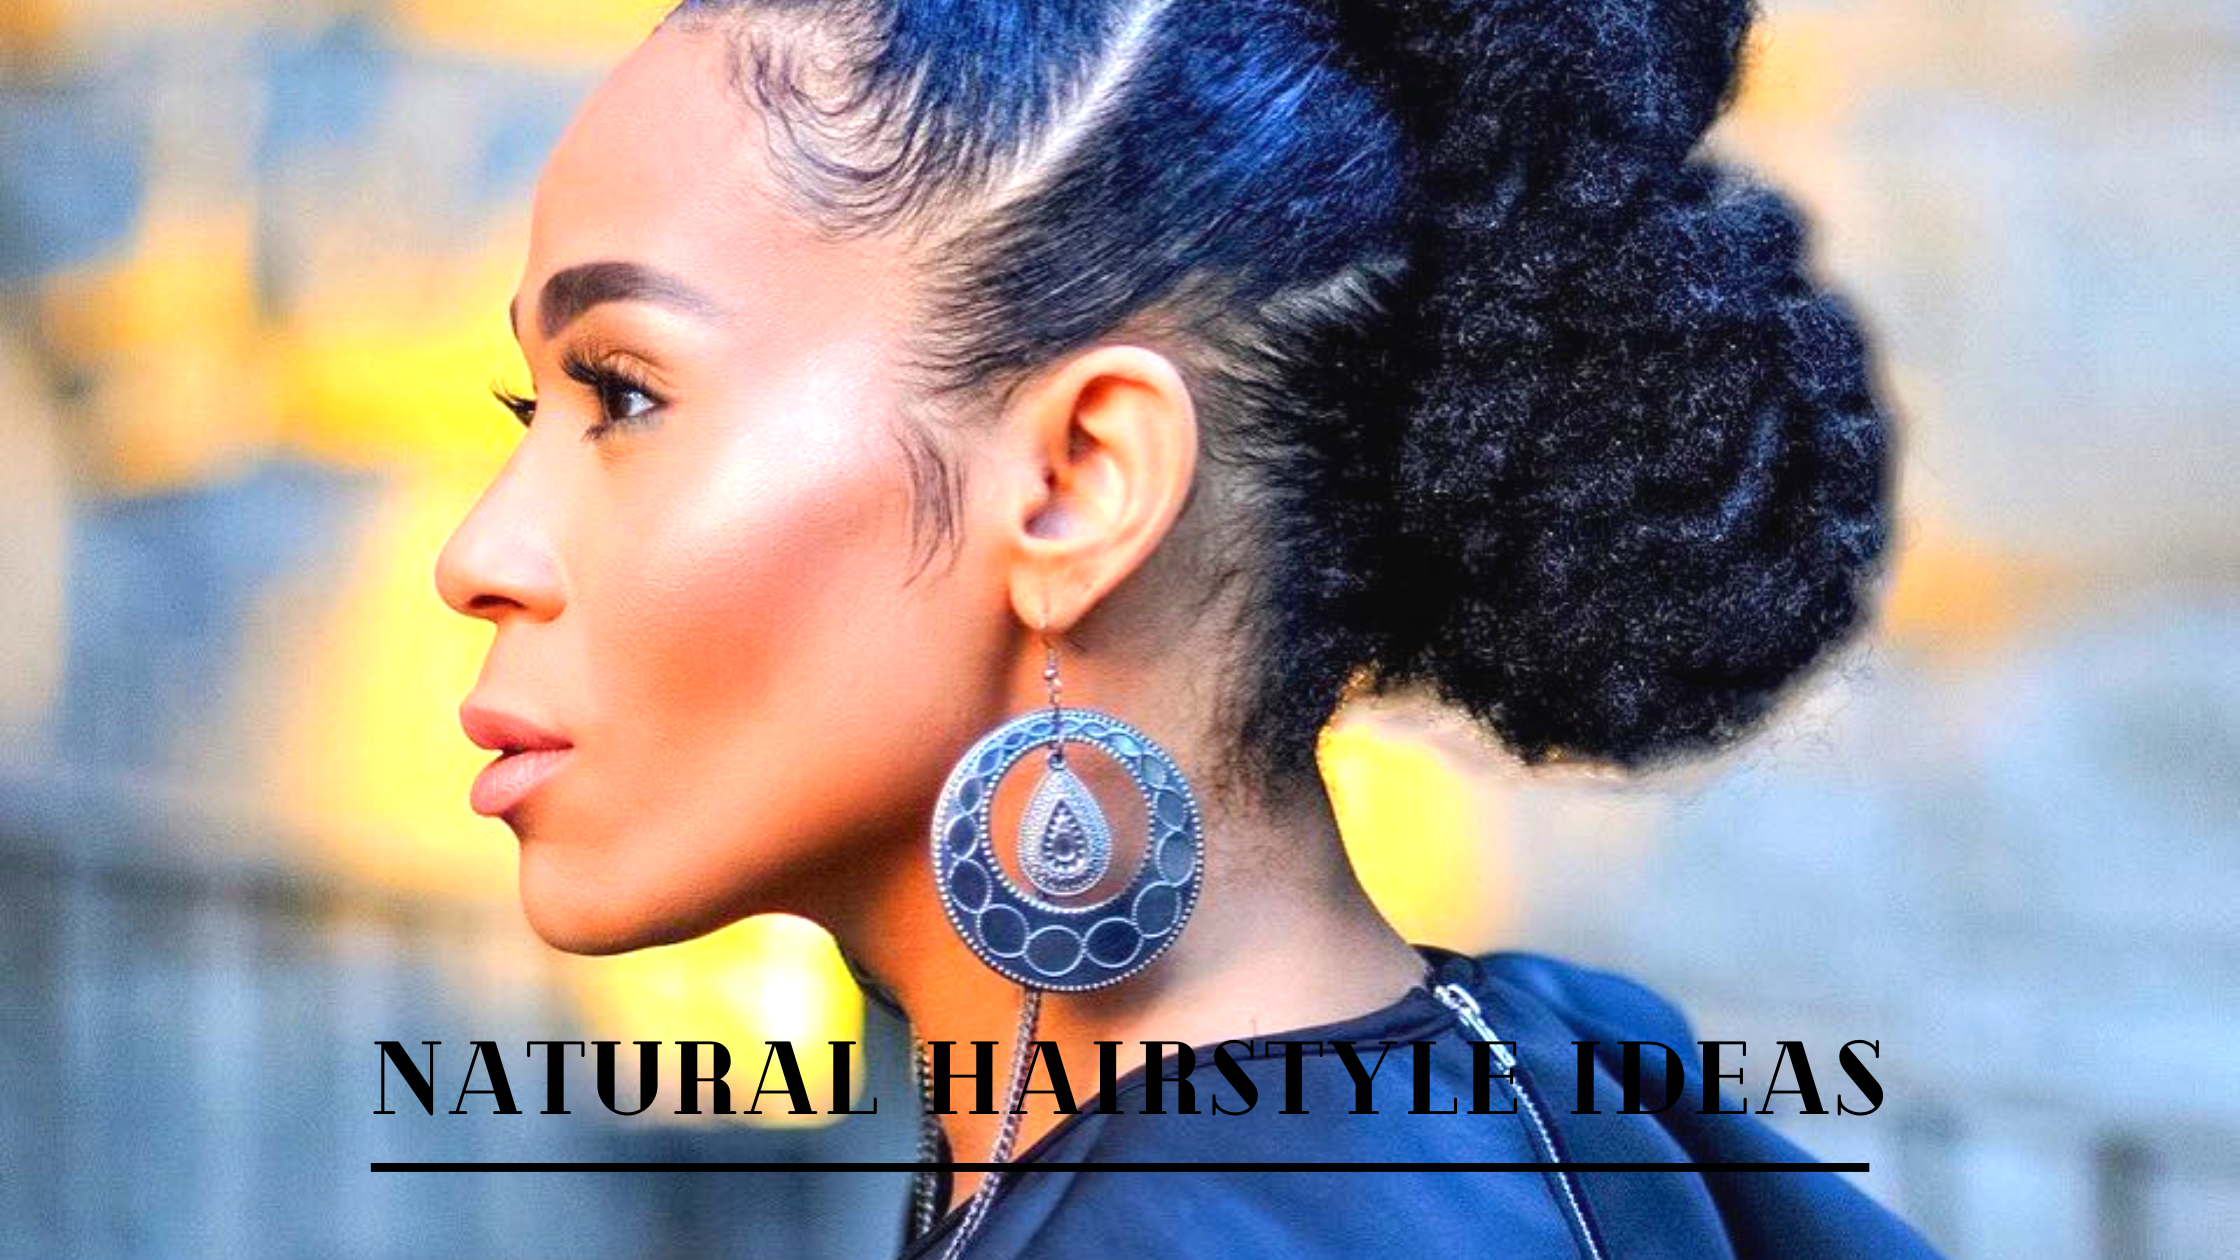 20 Beautiful Natural Hairstyles Ideas For Wedding